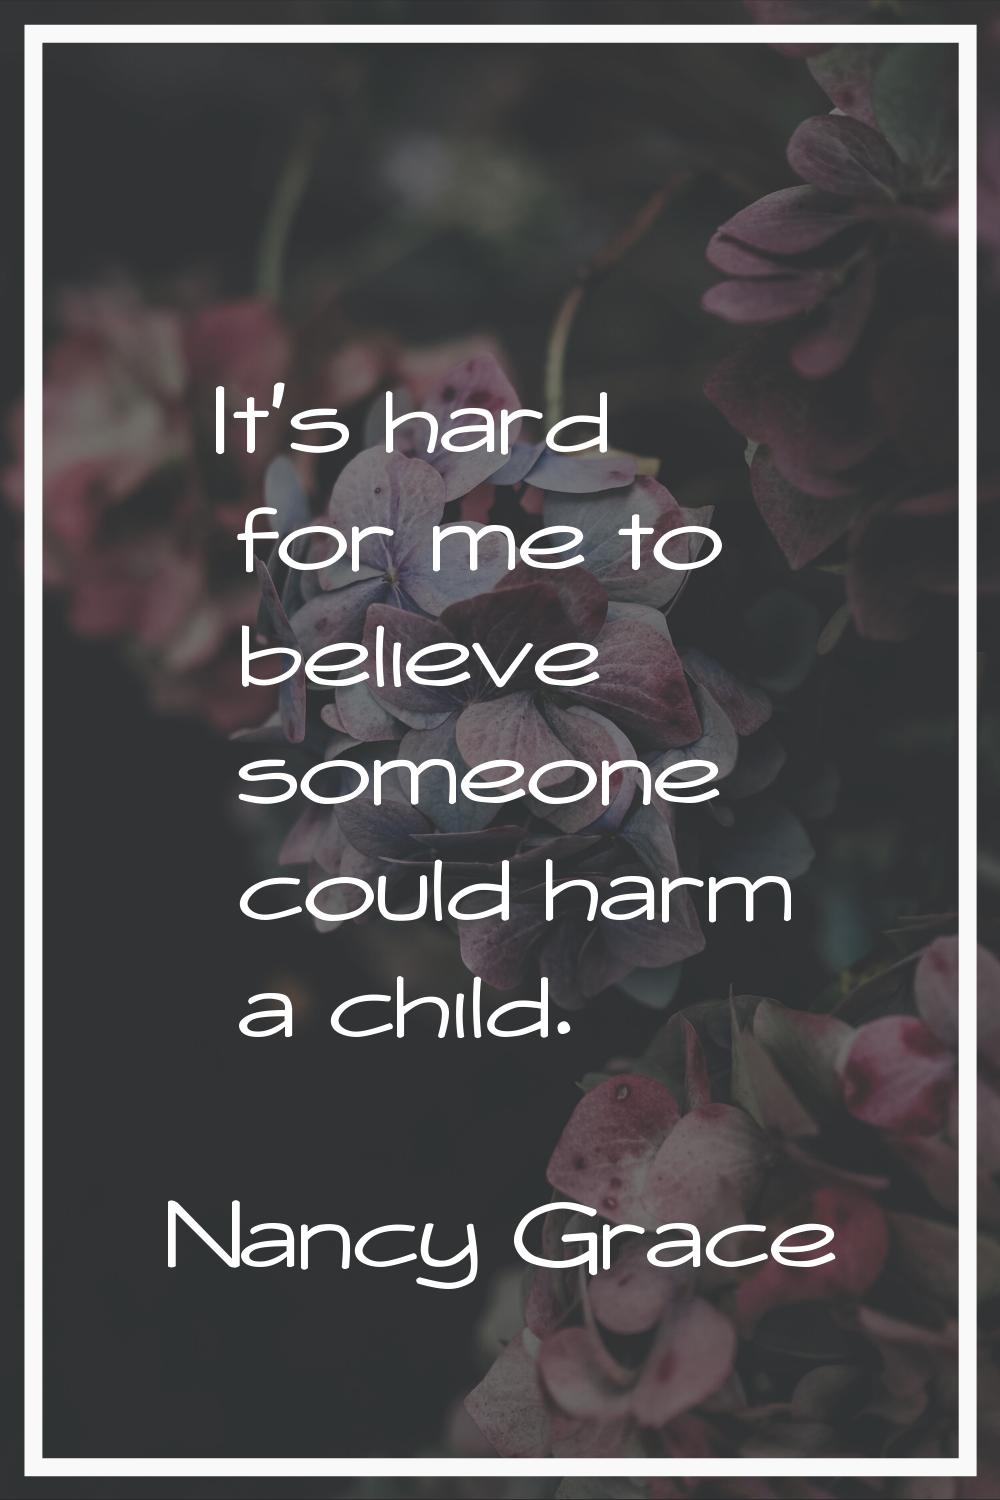 It's hard for me to believe someone could harm a child.